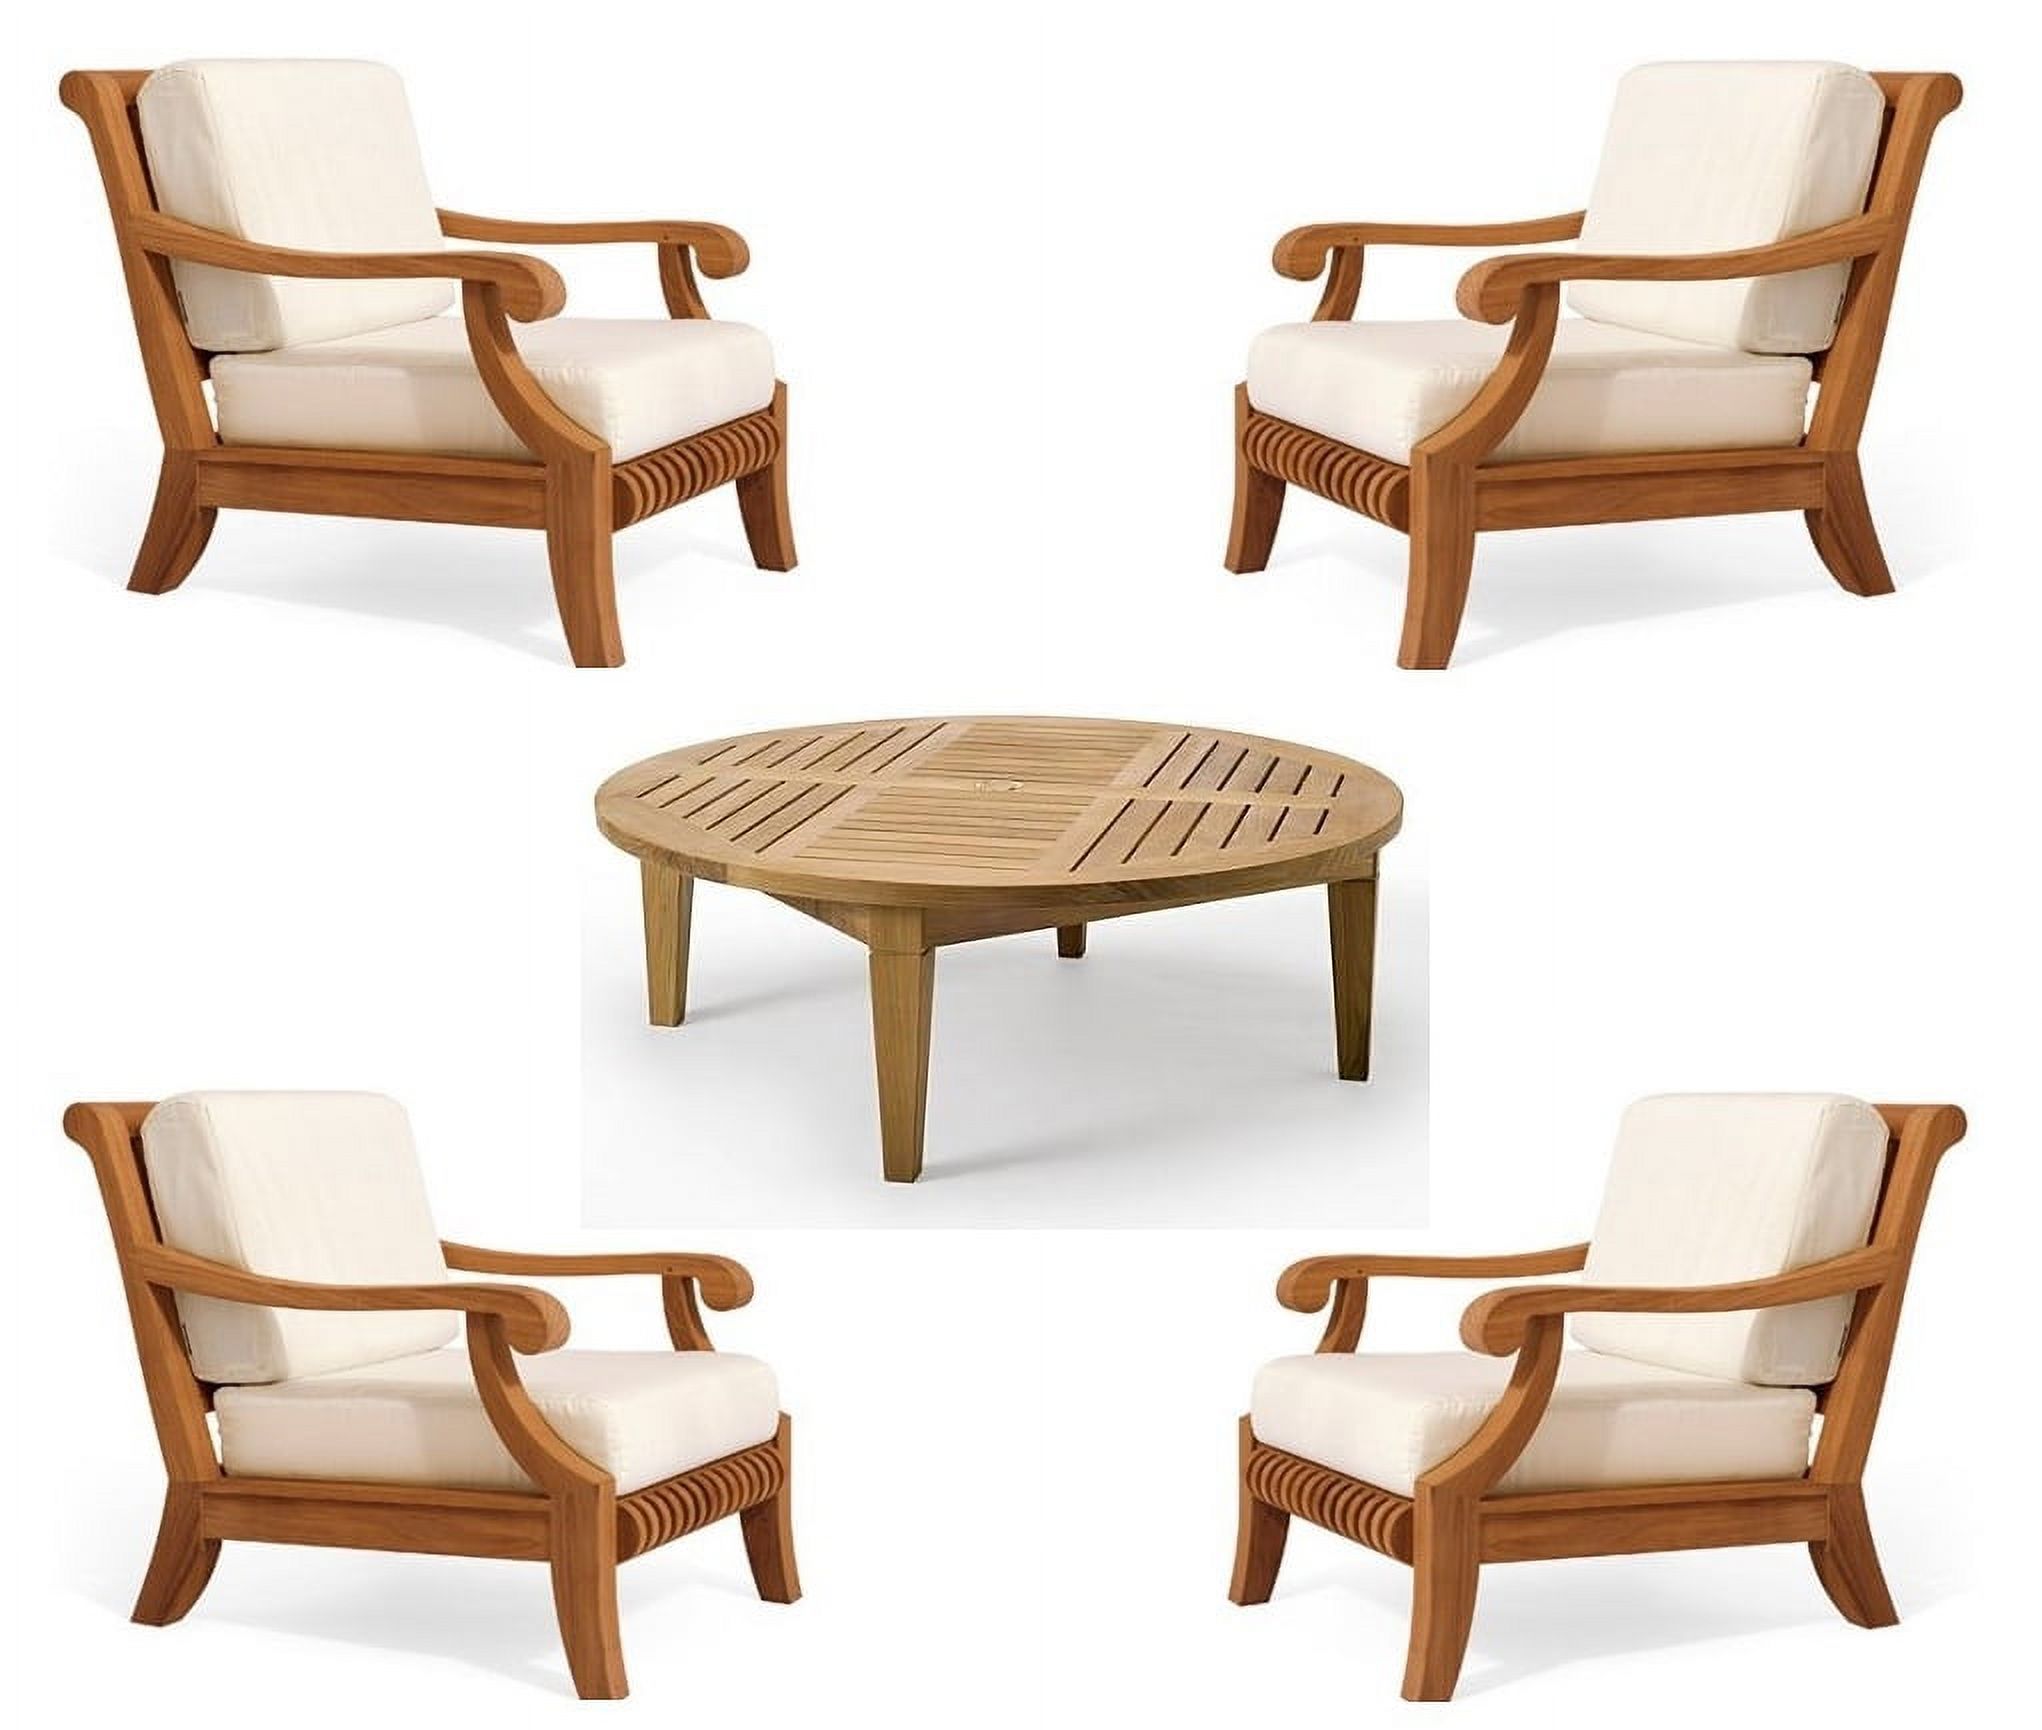 WholesaleTeak Outdoor Patio Grade-A Teak Wood 5 Piece Teak Sofa Set - 4 Lounge Chairs & 1 Round Coffee Table -Furniture only --Giva Collection #WMSSGV4 - image 1 of 5